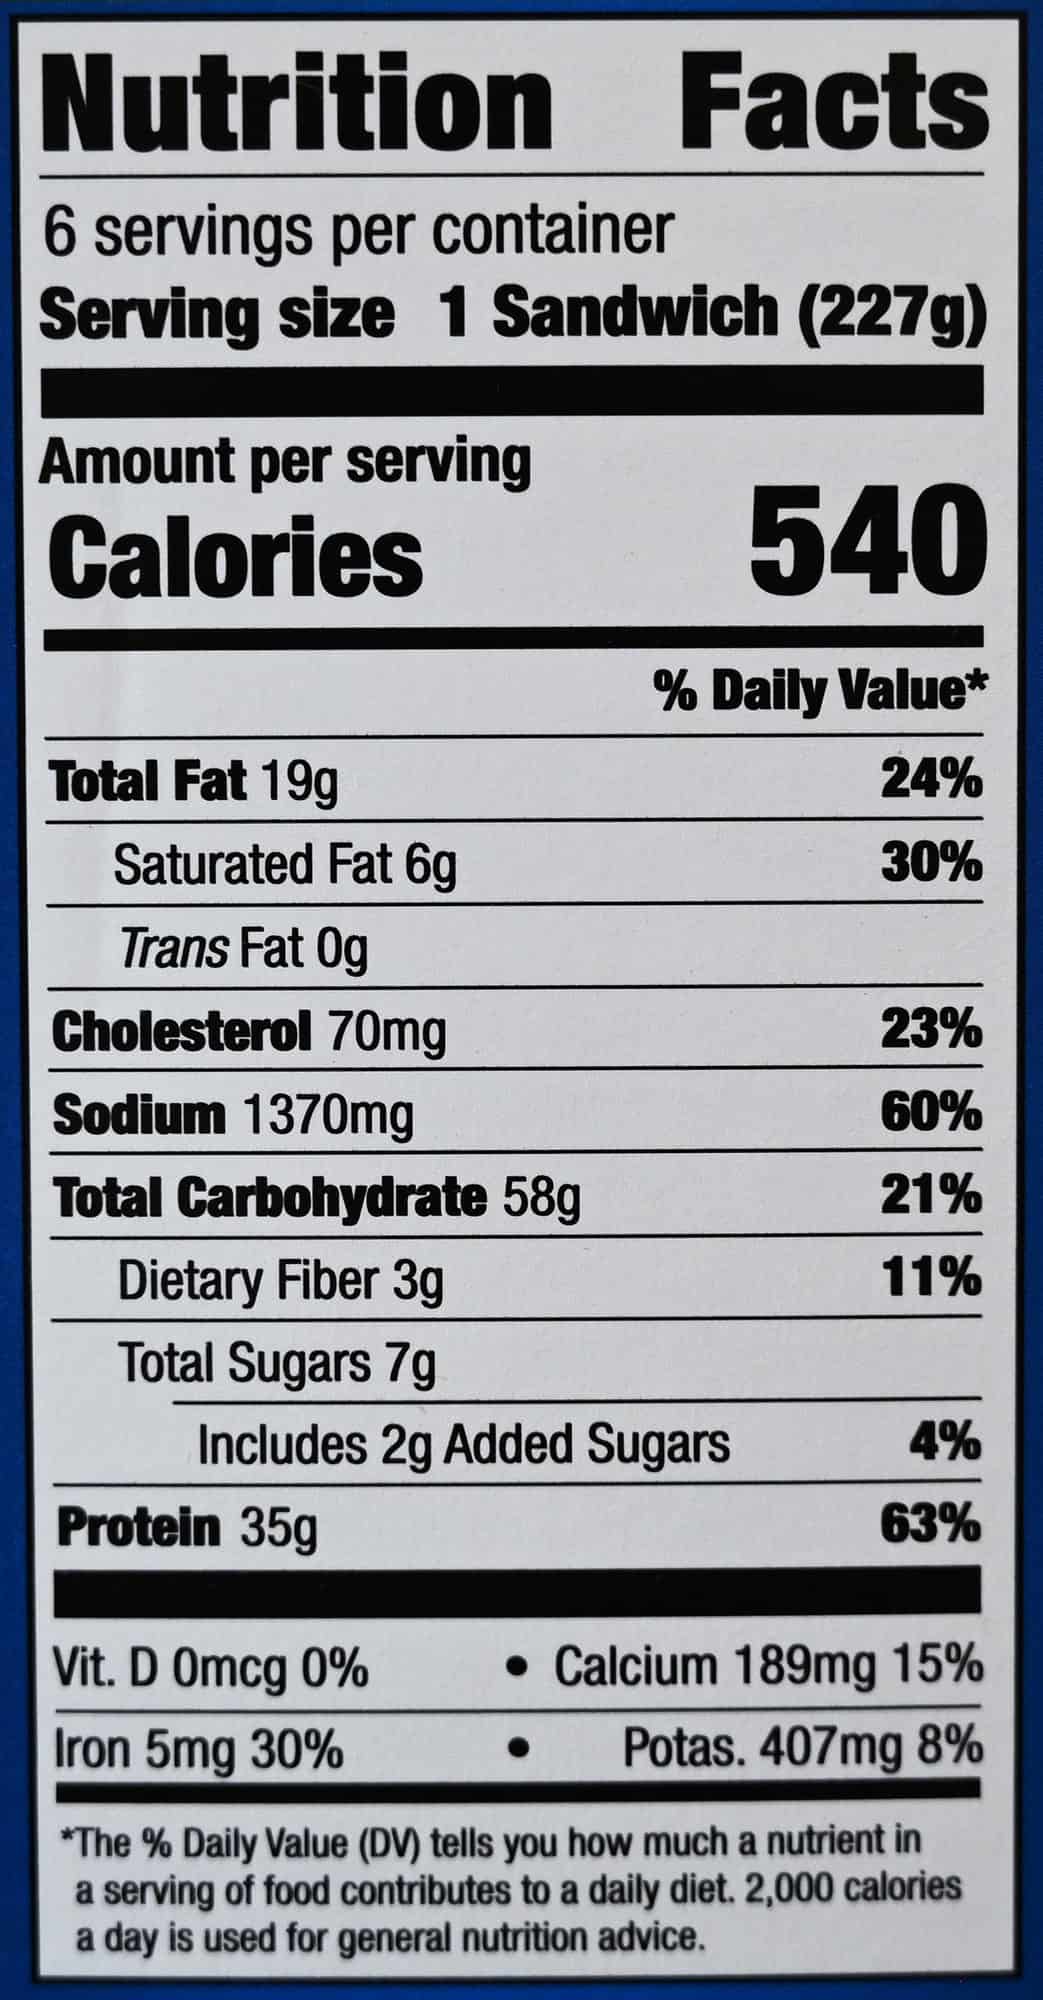 Image of the nutrition facts for the chicken bakes from the back of the box.